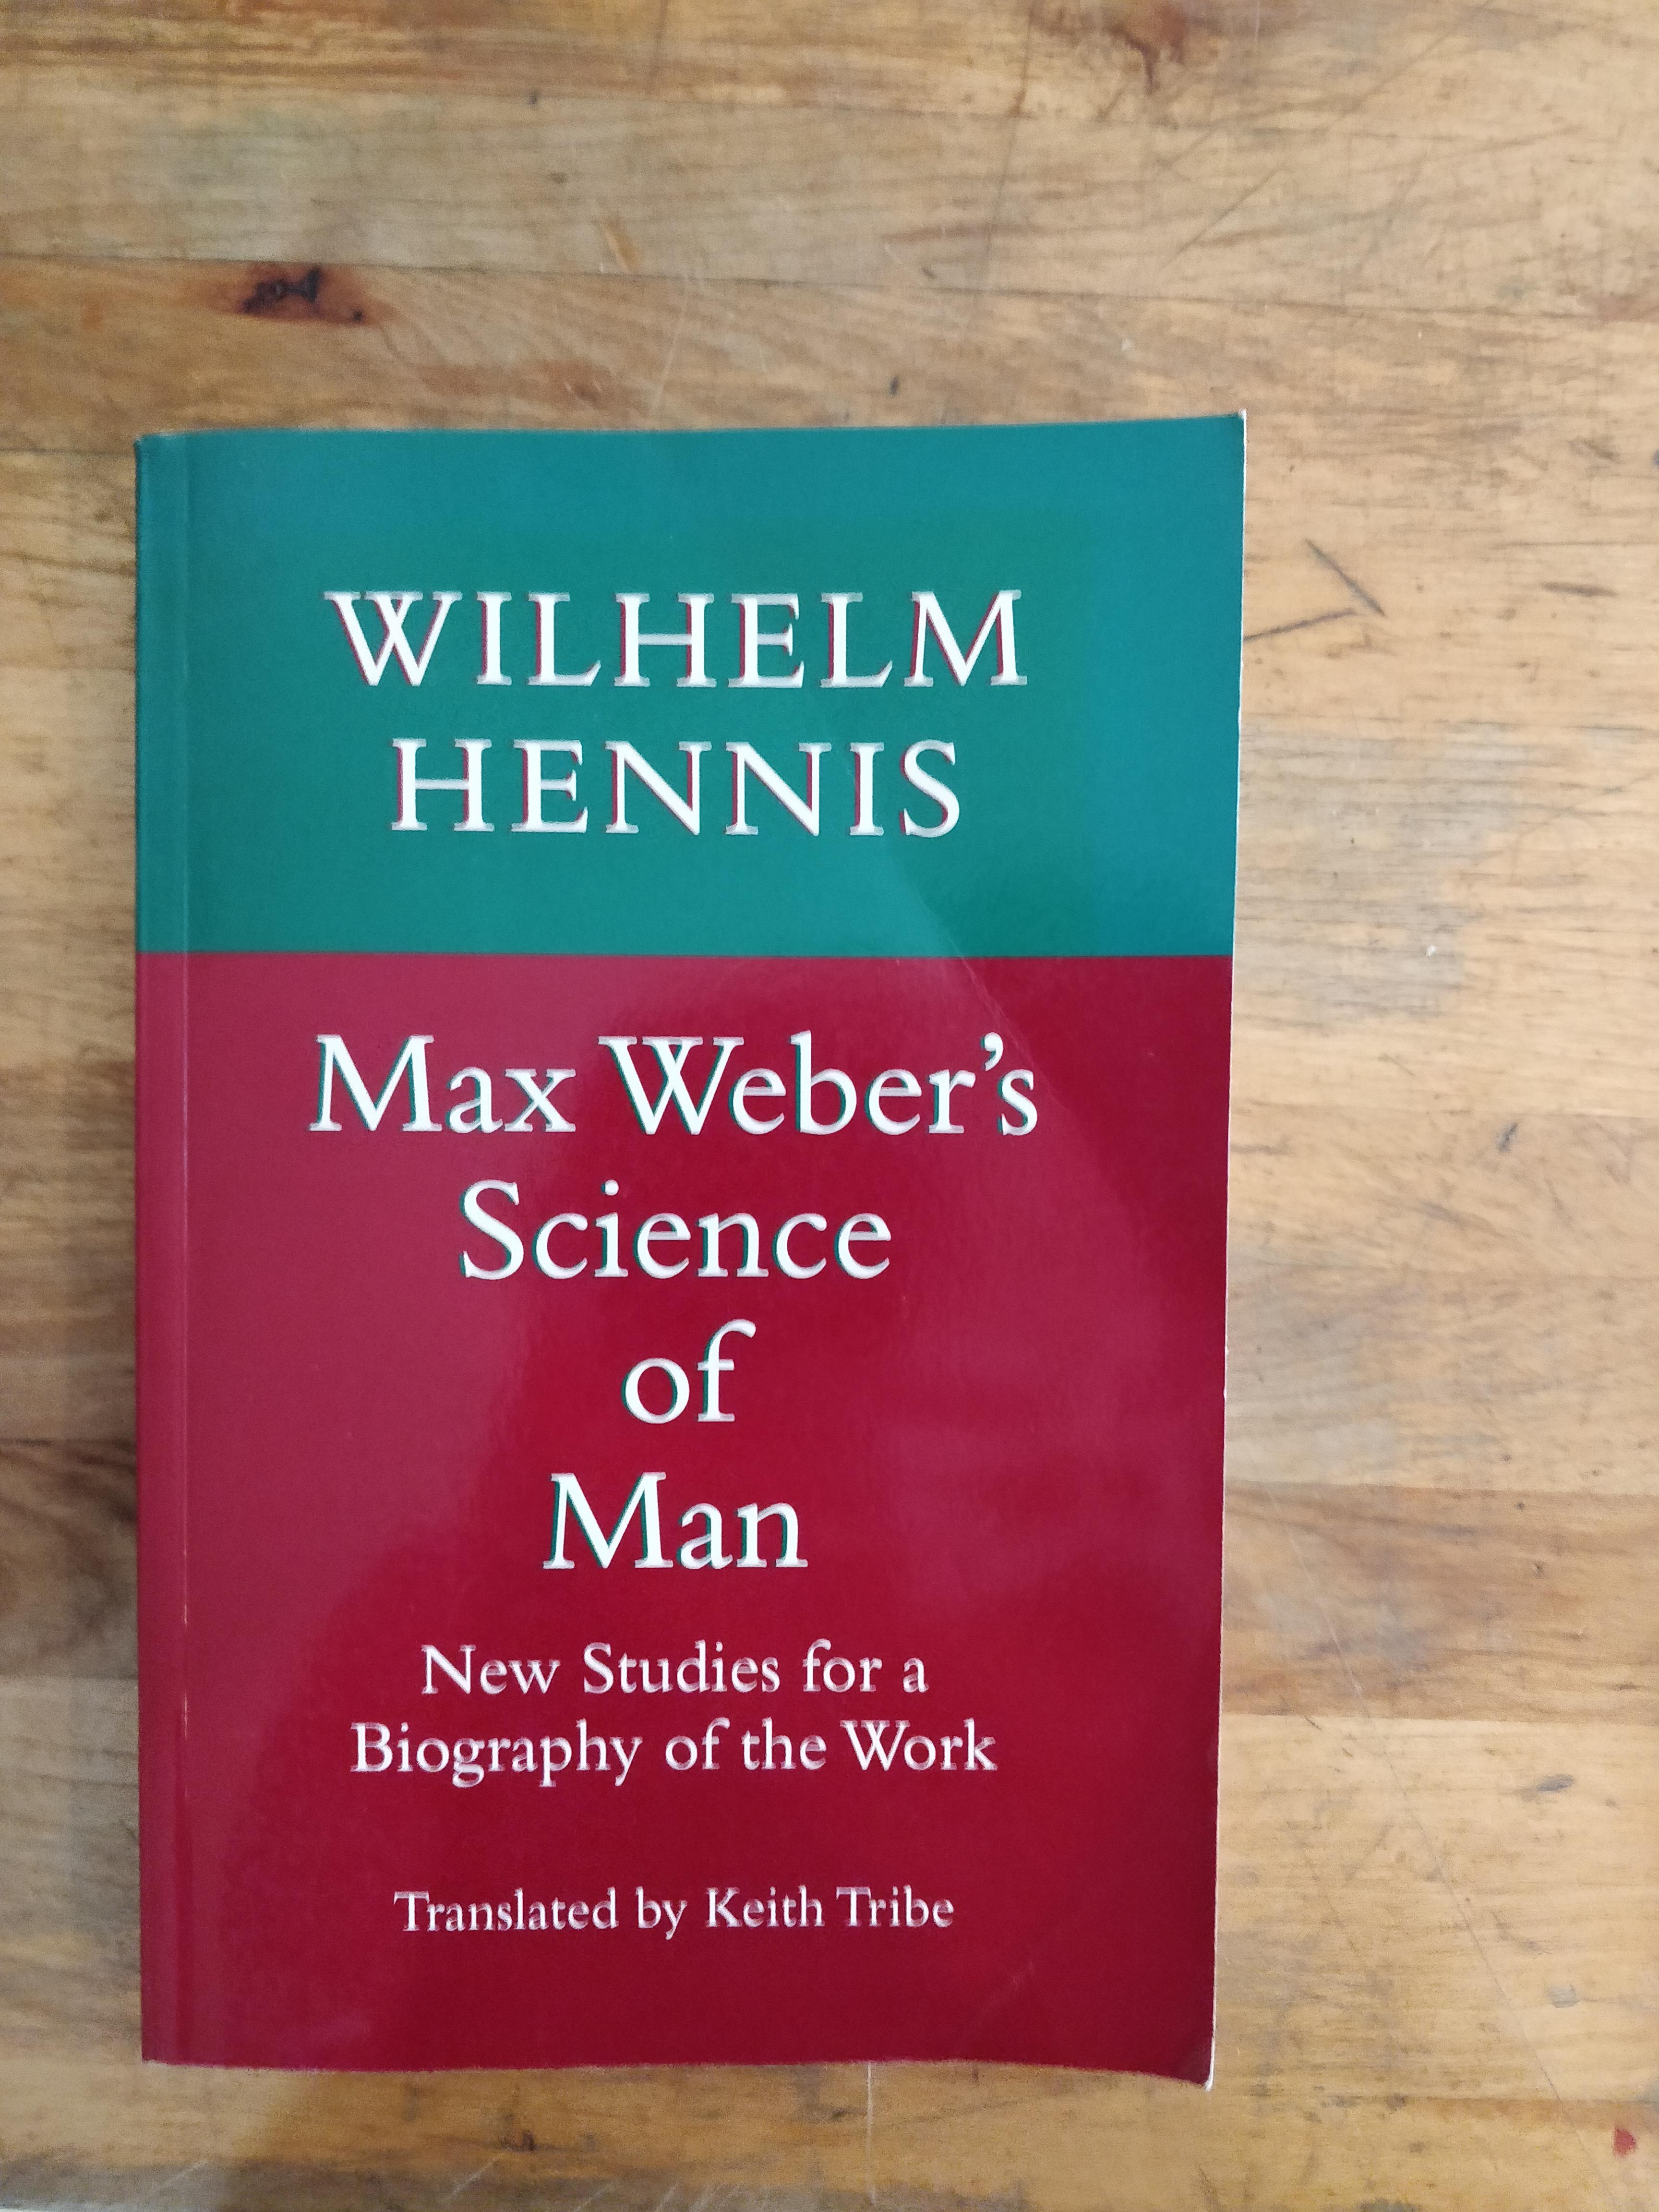 Max Weber's Science of Man: New Studies for a Biography of the Work - Weber. Max; Hennis, Wilhelm; Tribe, Keith (trans.)